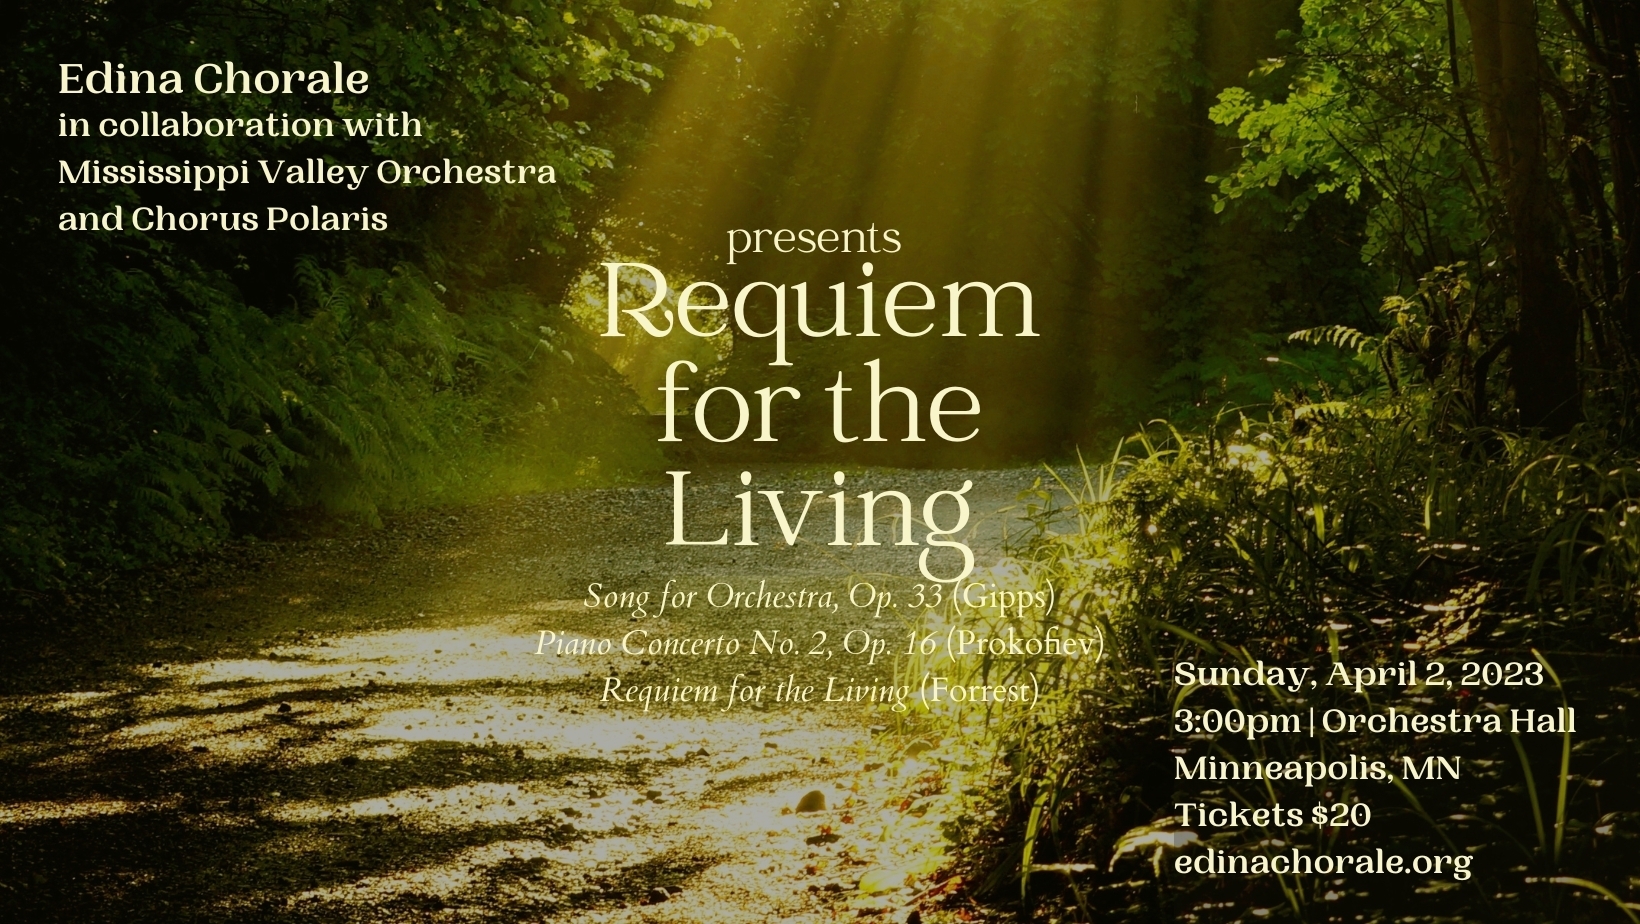 Edina Chorale, Mississippi Valley Orchestra and Chorus Polaris present "Requiem for the Living", Minneapolis, Minnesota, United States